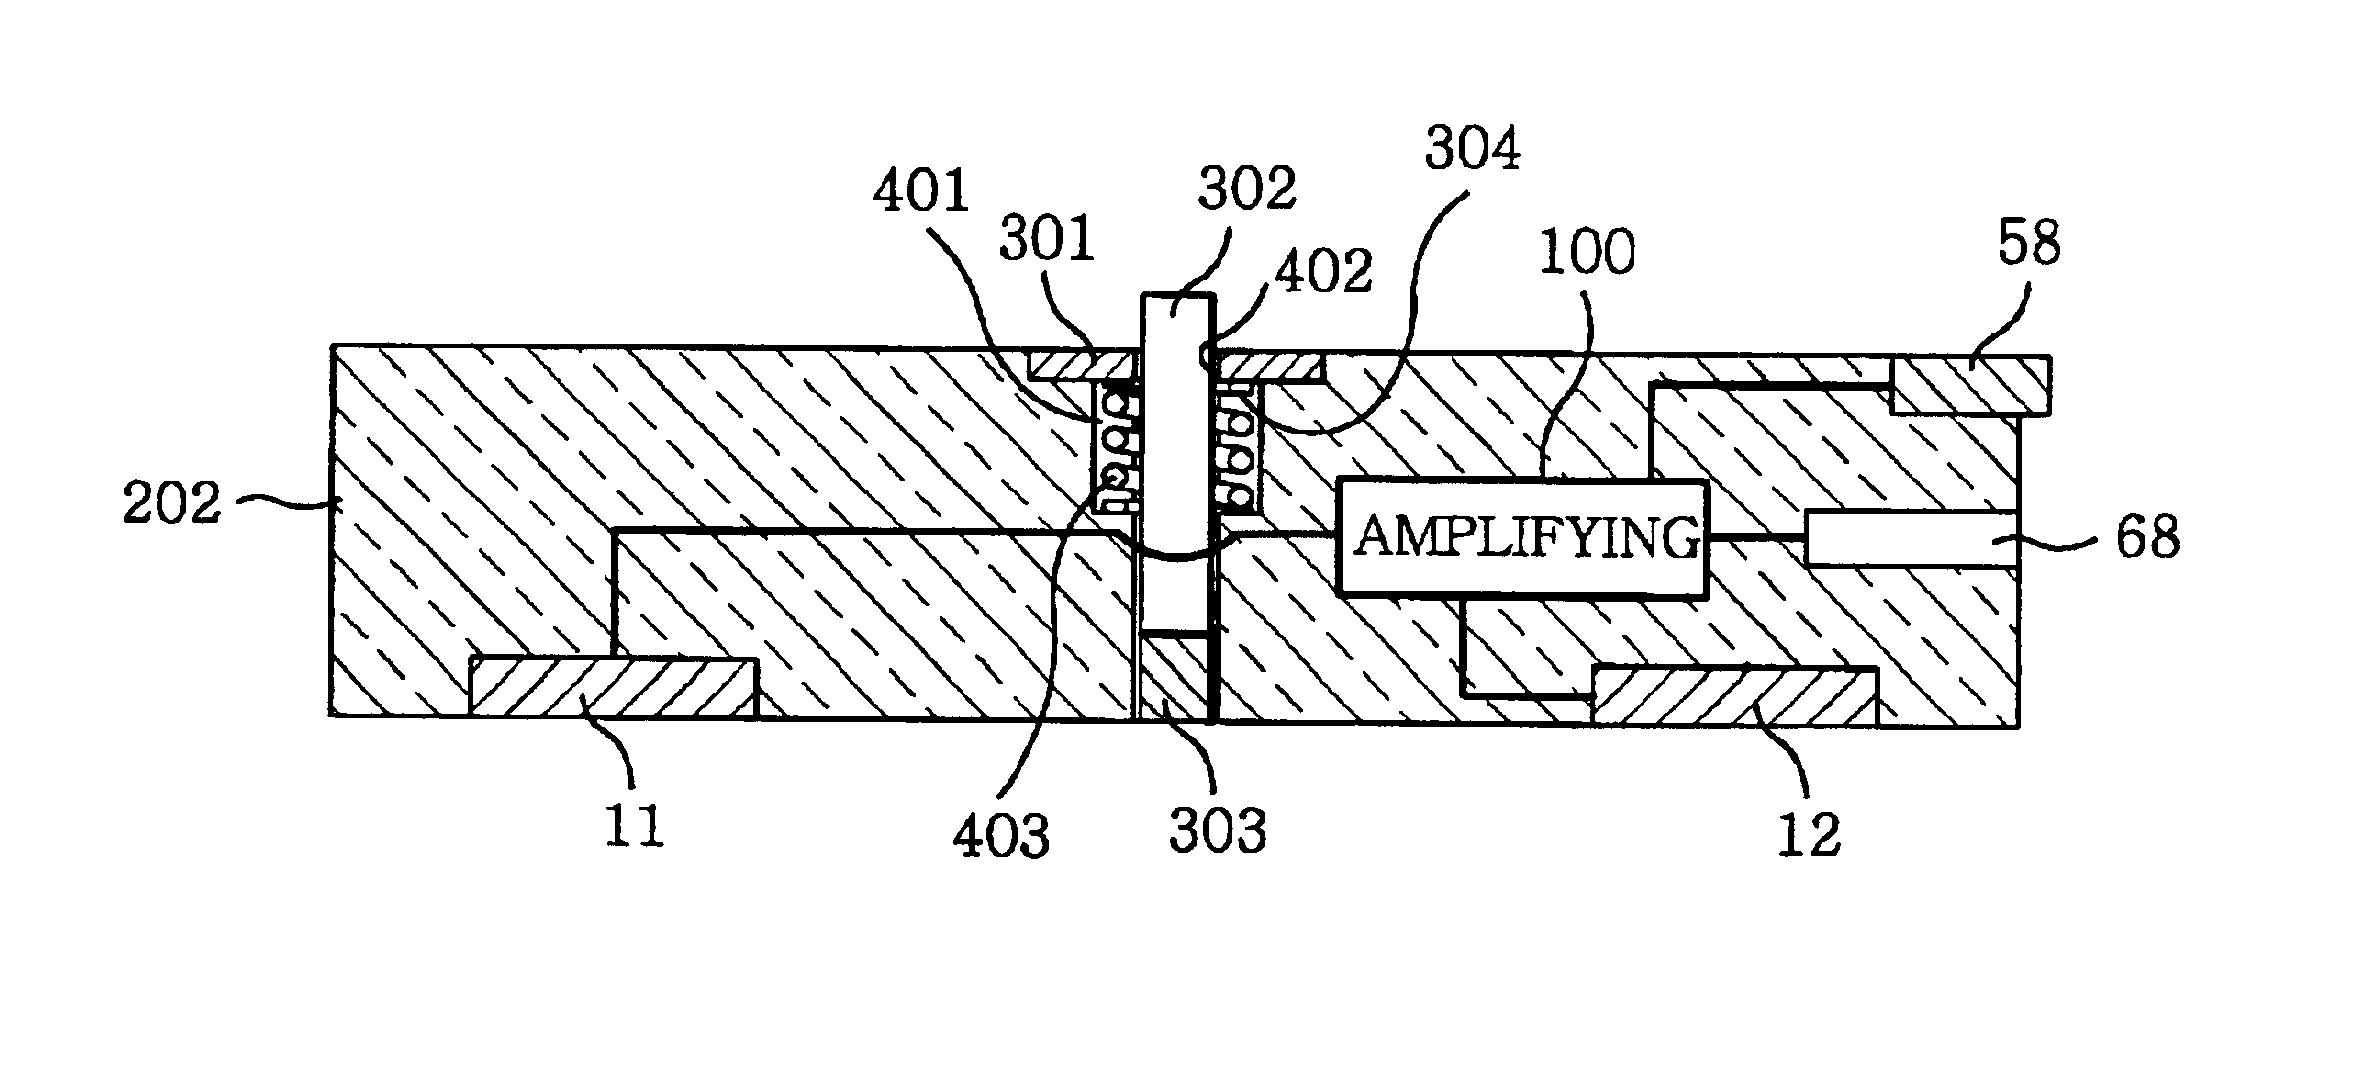 Apparatus for positioning and marking a location of an EMG electrode